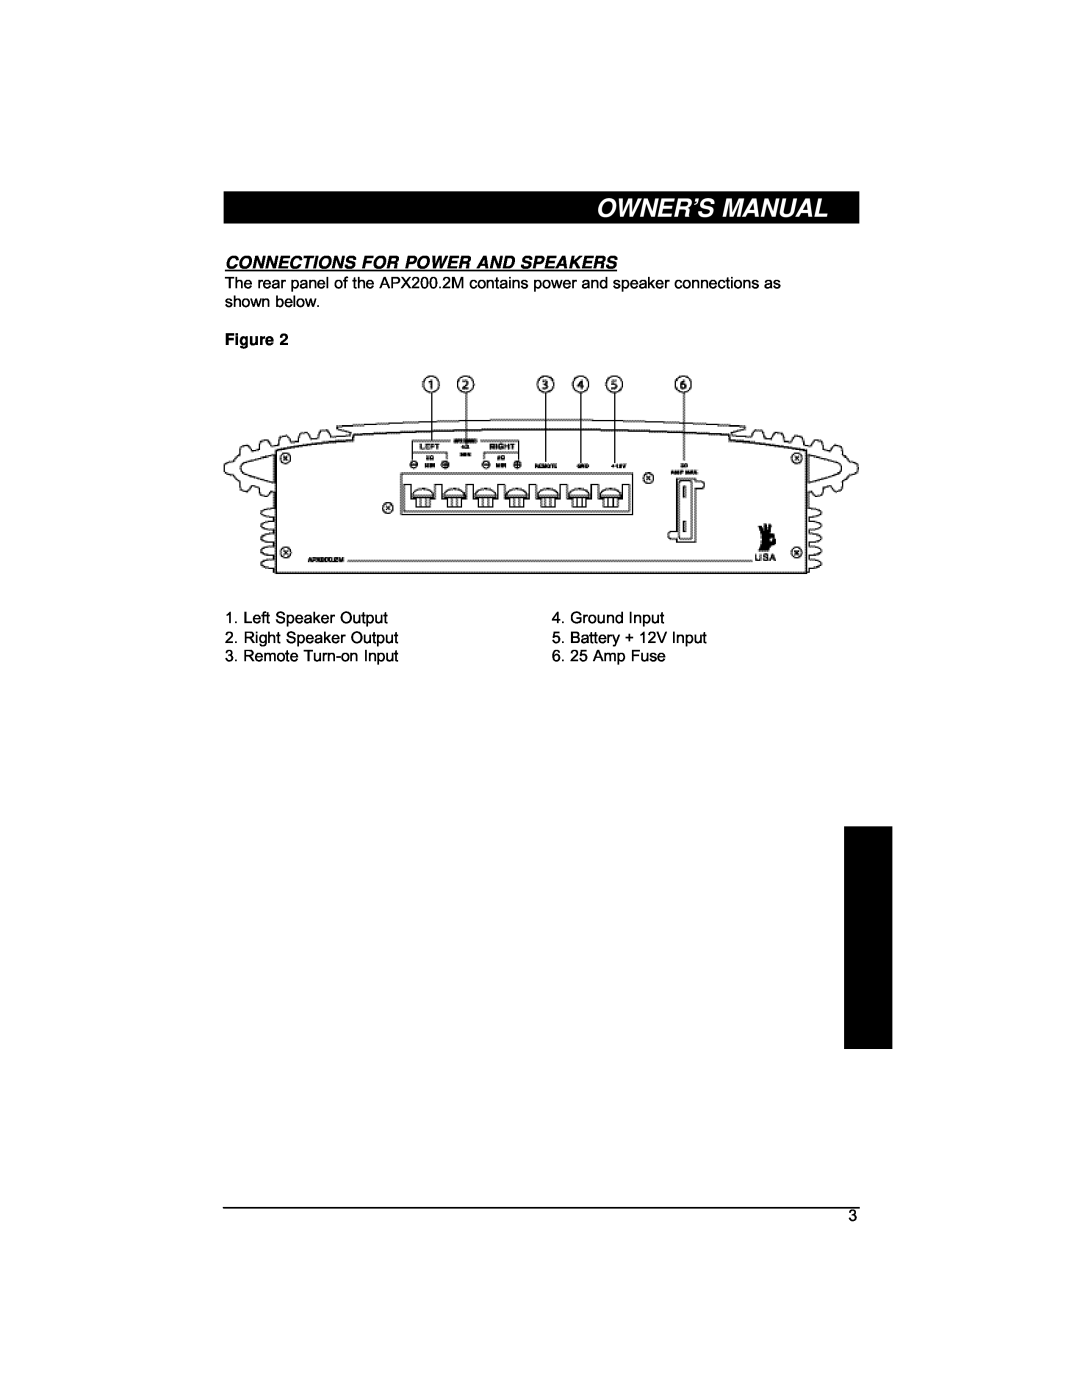 Clarion APX200 installation manual Connections For Power And Speakers 